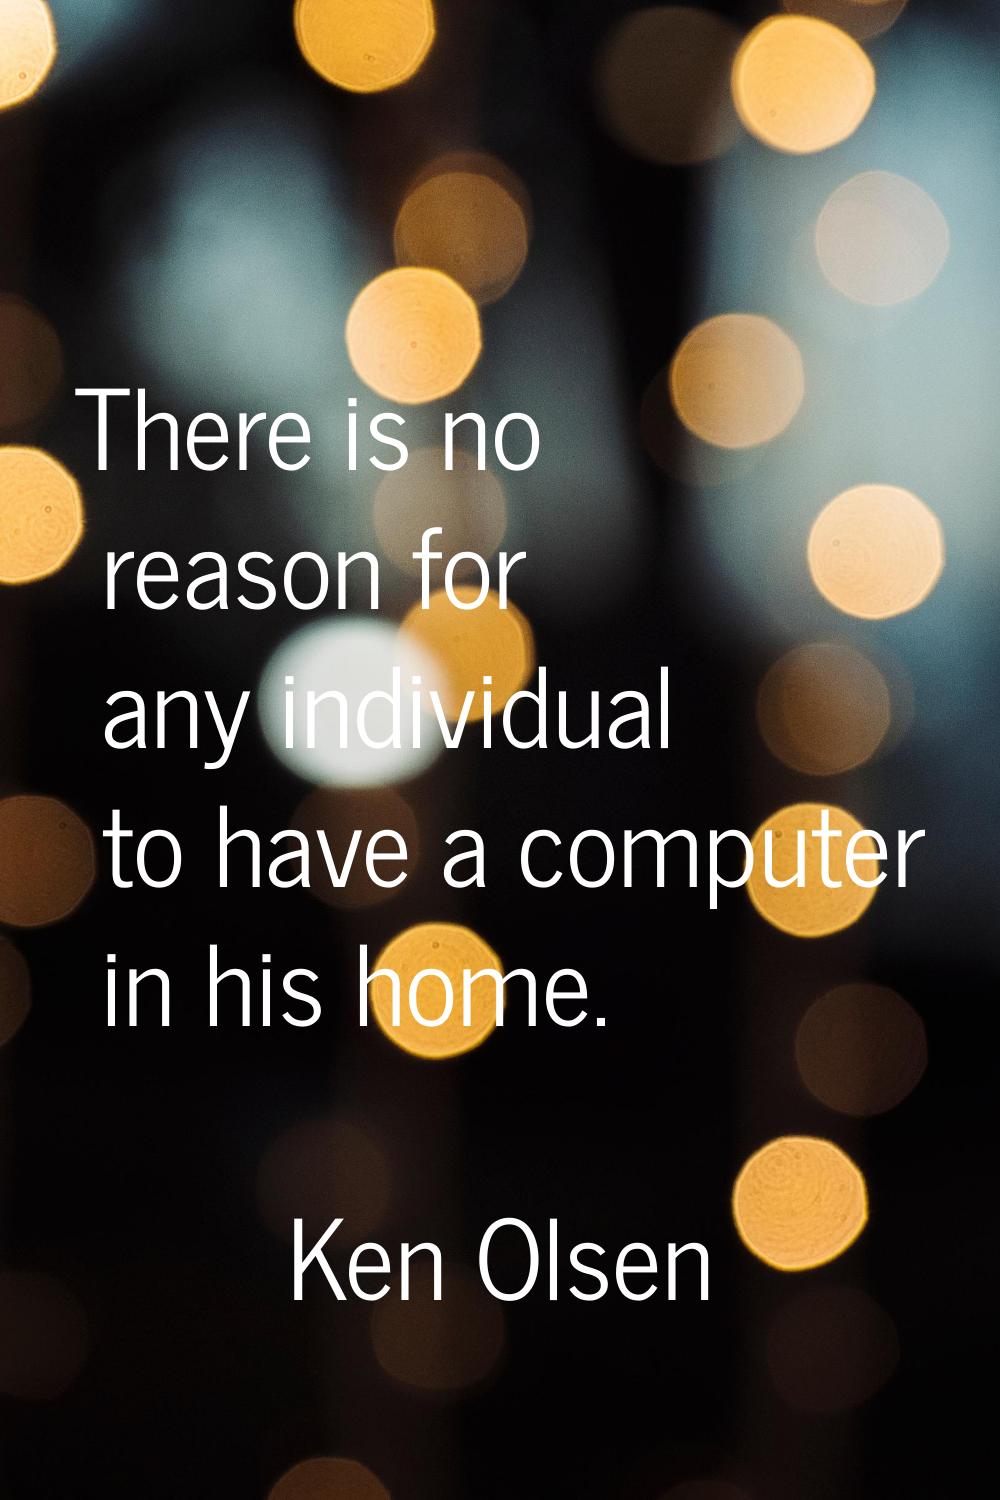 There is no reason for any individual to have a computer in his home.